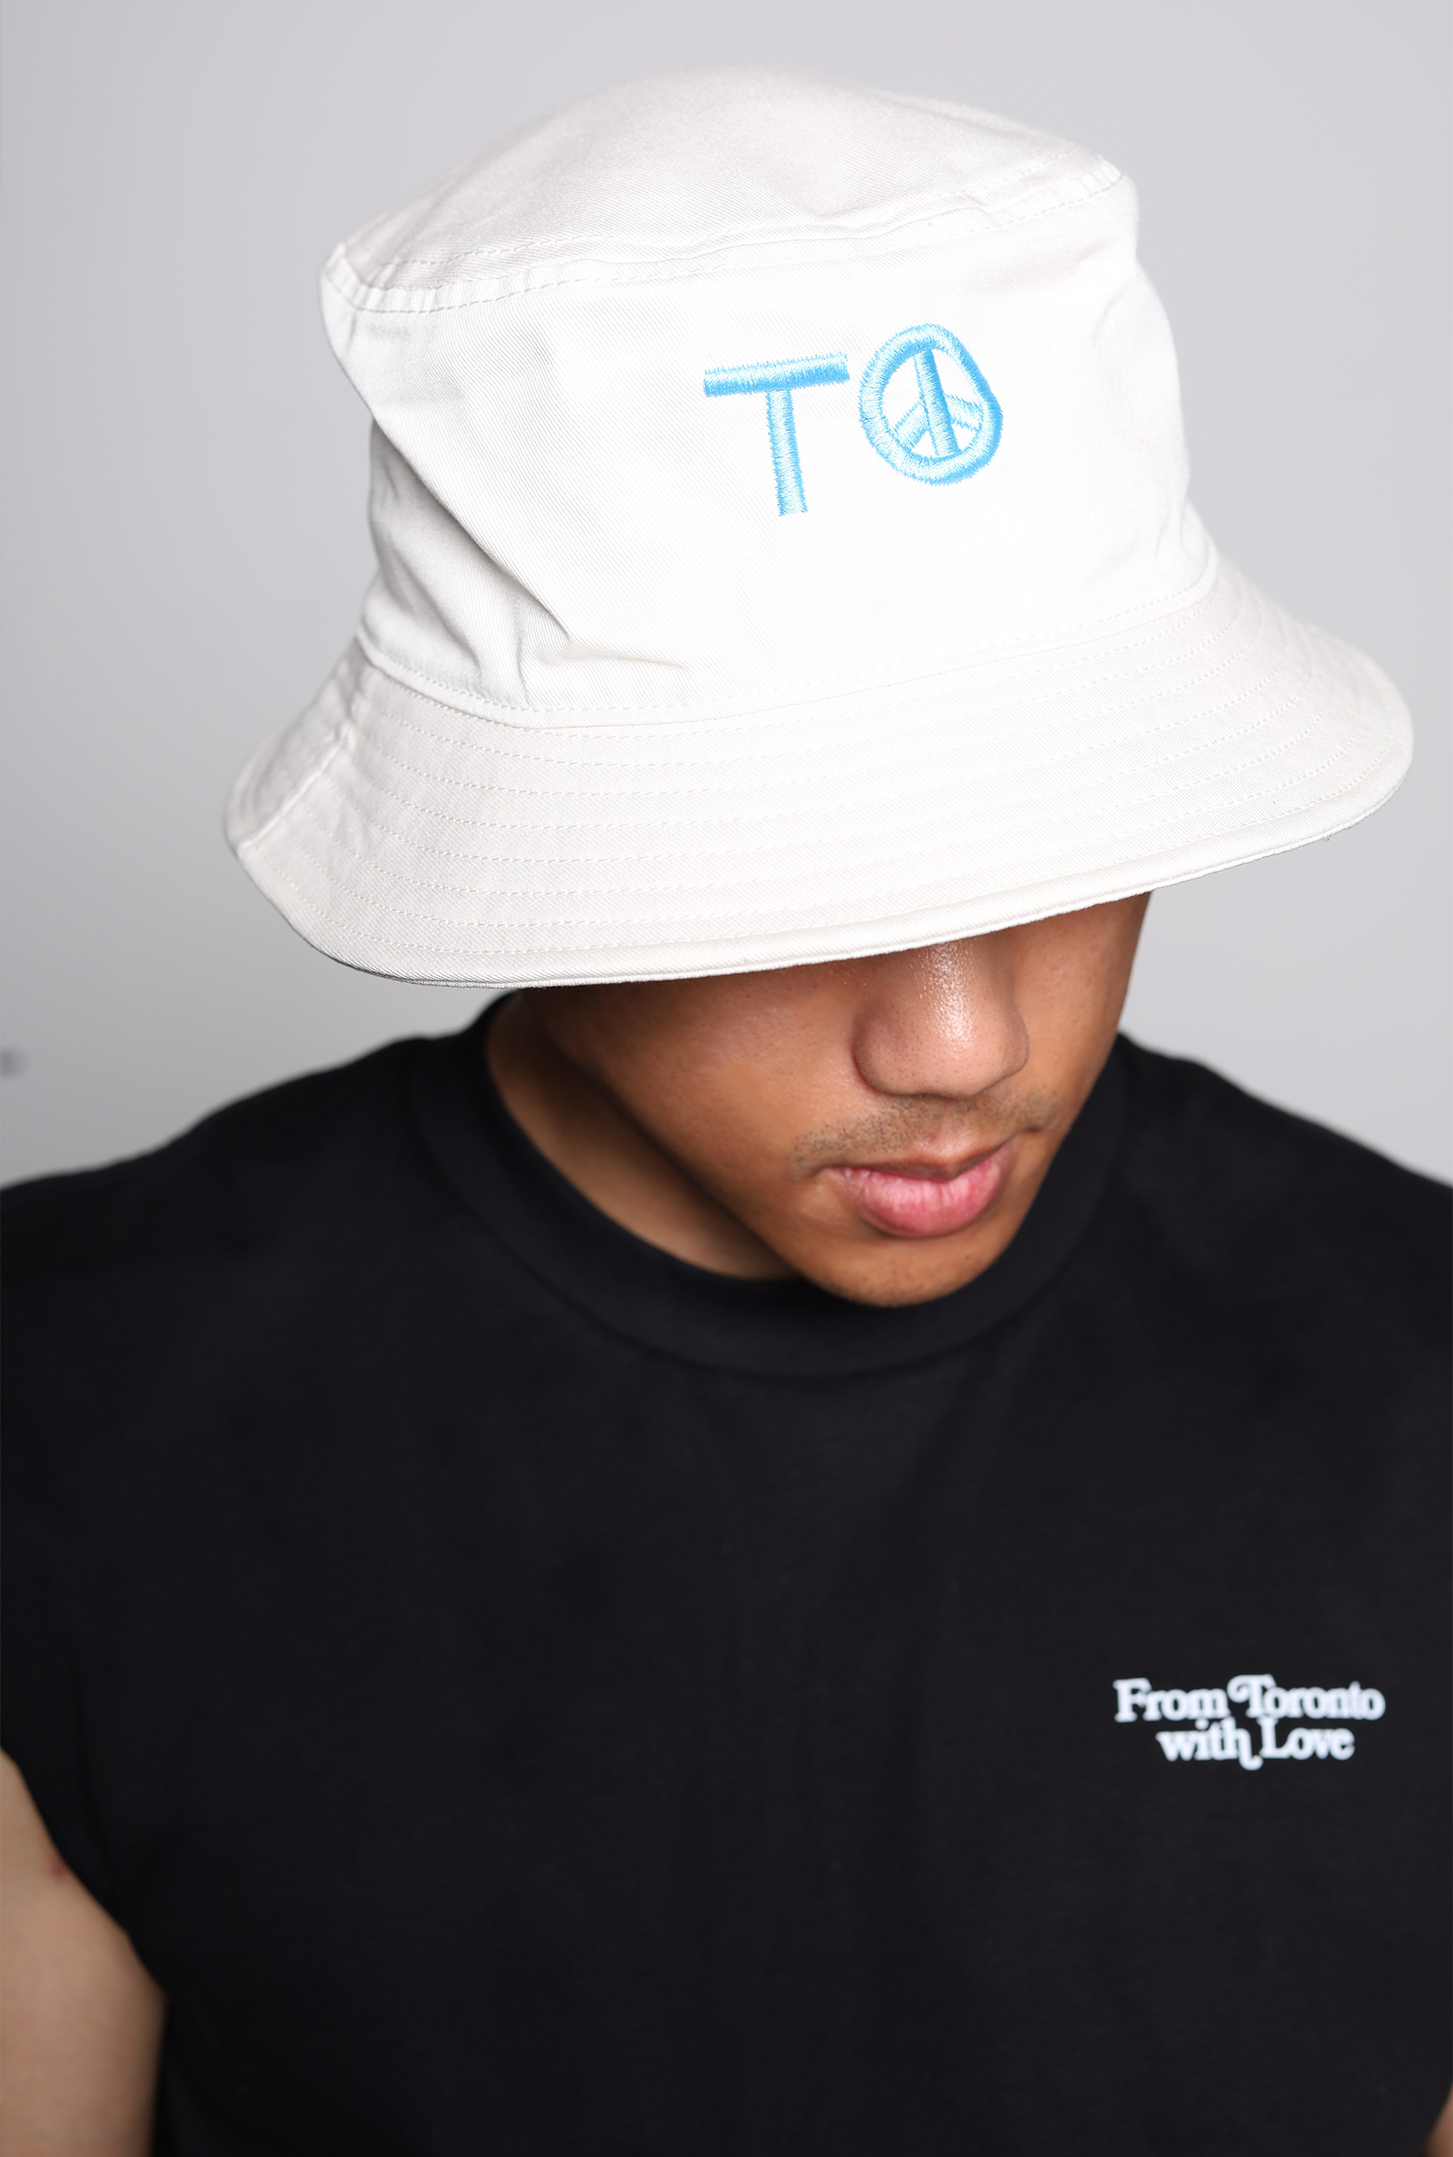 "TO" Peace Sign Bucket Hat - Ivory